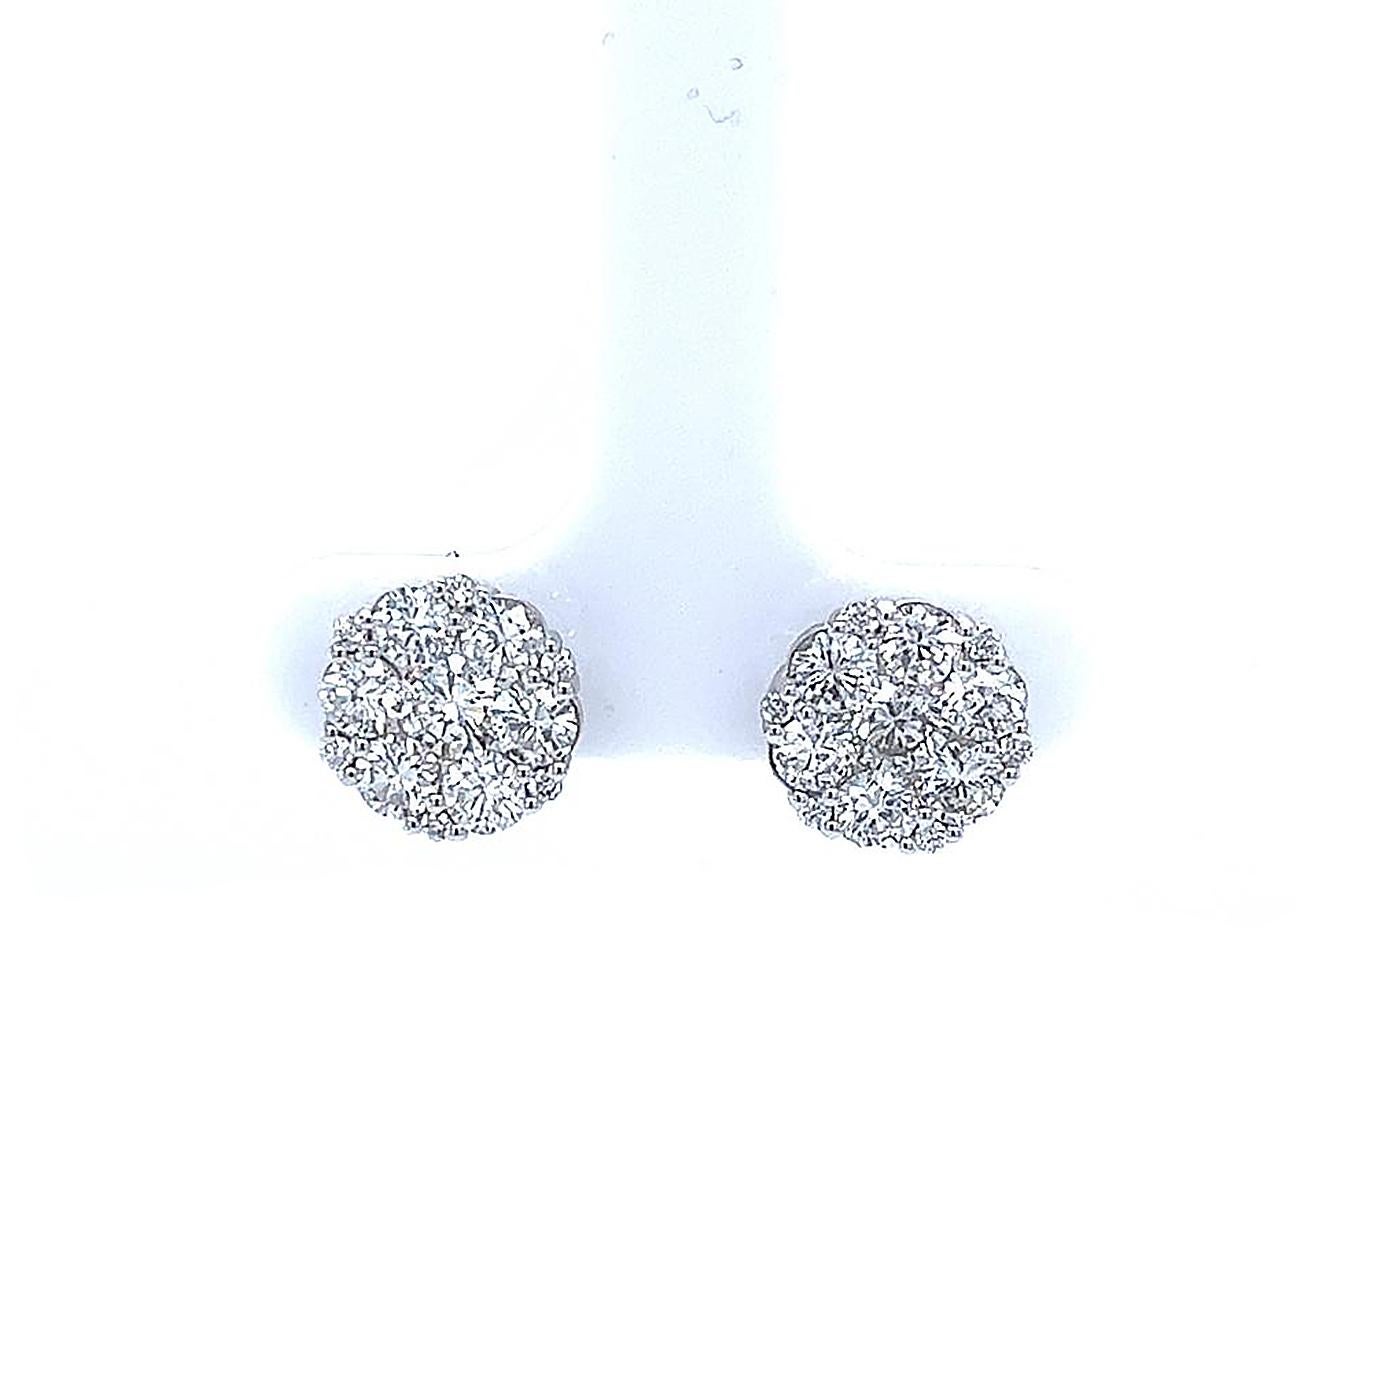 Captivate her with the dazzling and stunning look of these mesmerizing diamond earrings. Beautifully crafted in luminous 14-karat white gold, these gorgeous diamond earrings feature 7 round cut diamonds on each Earring, a perfectly invisible set.